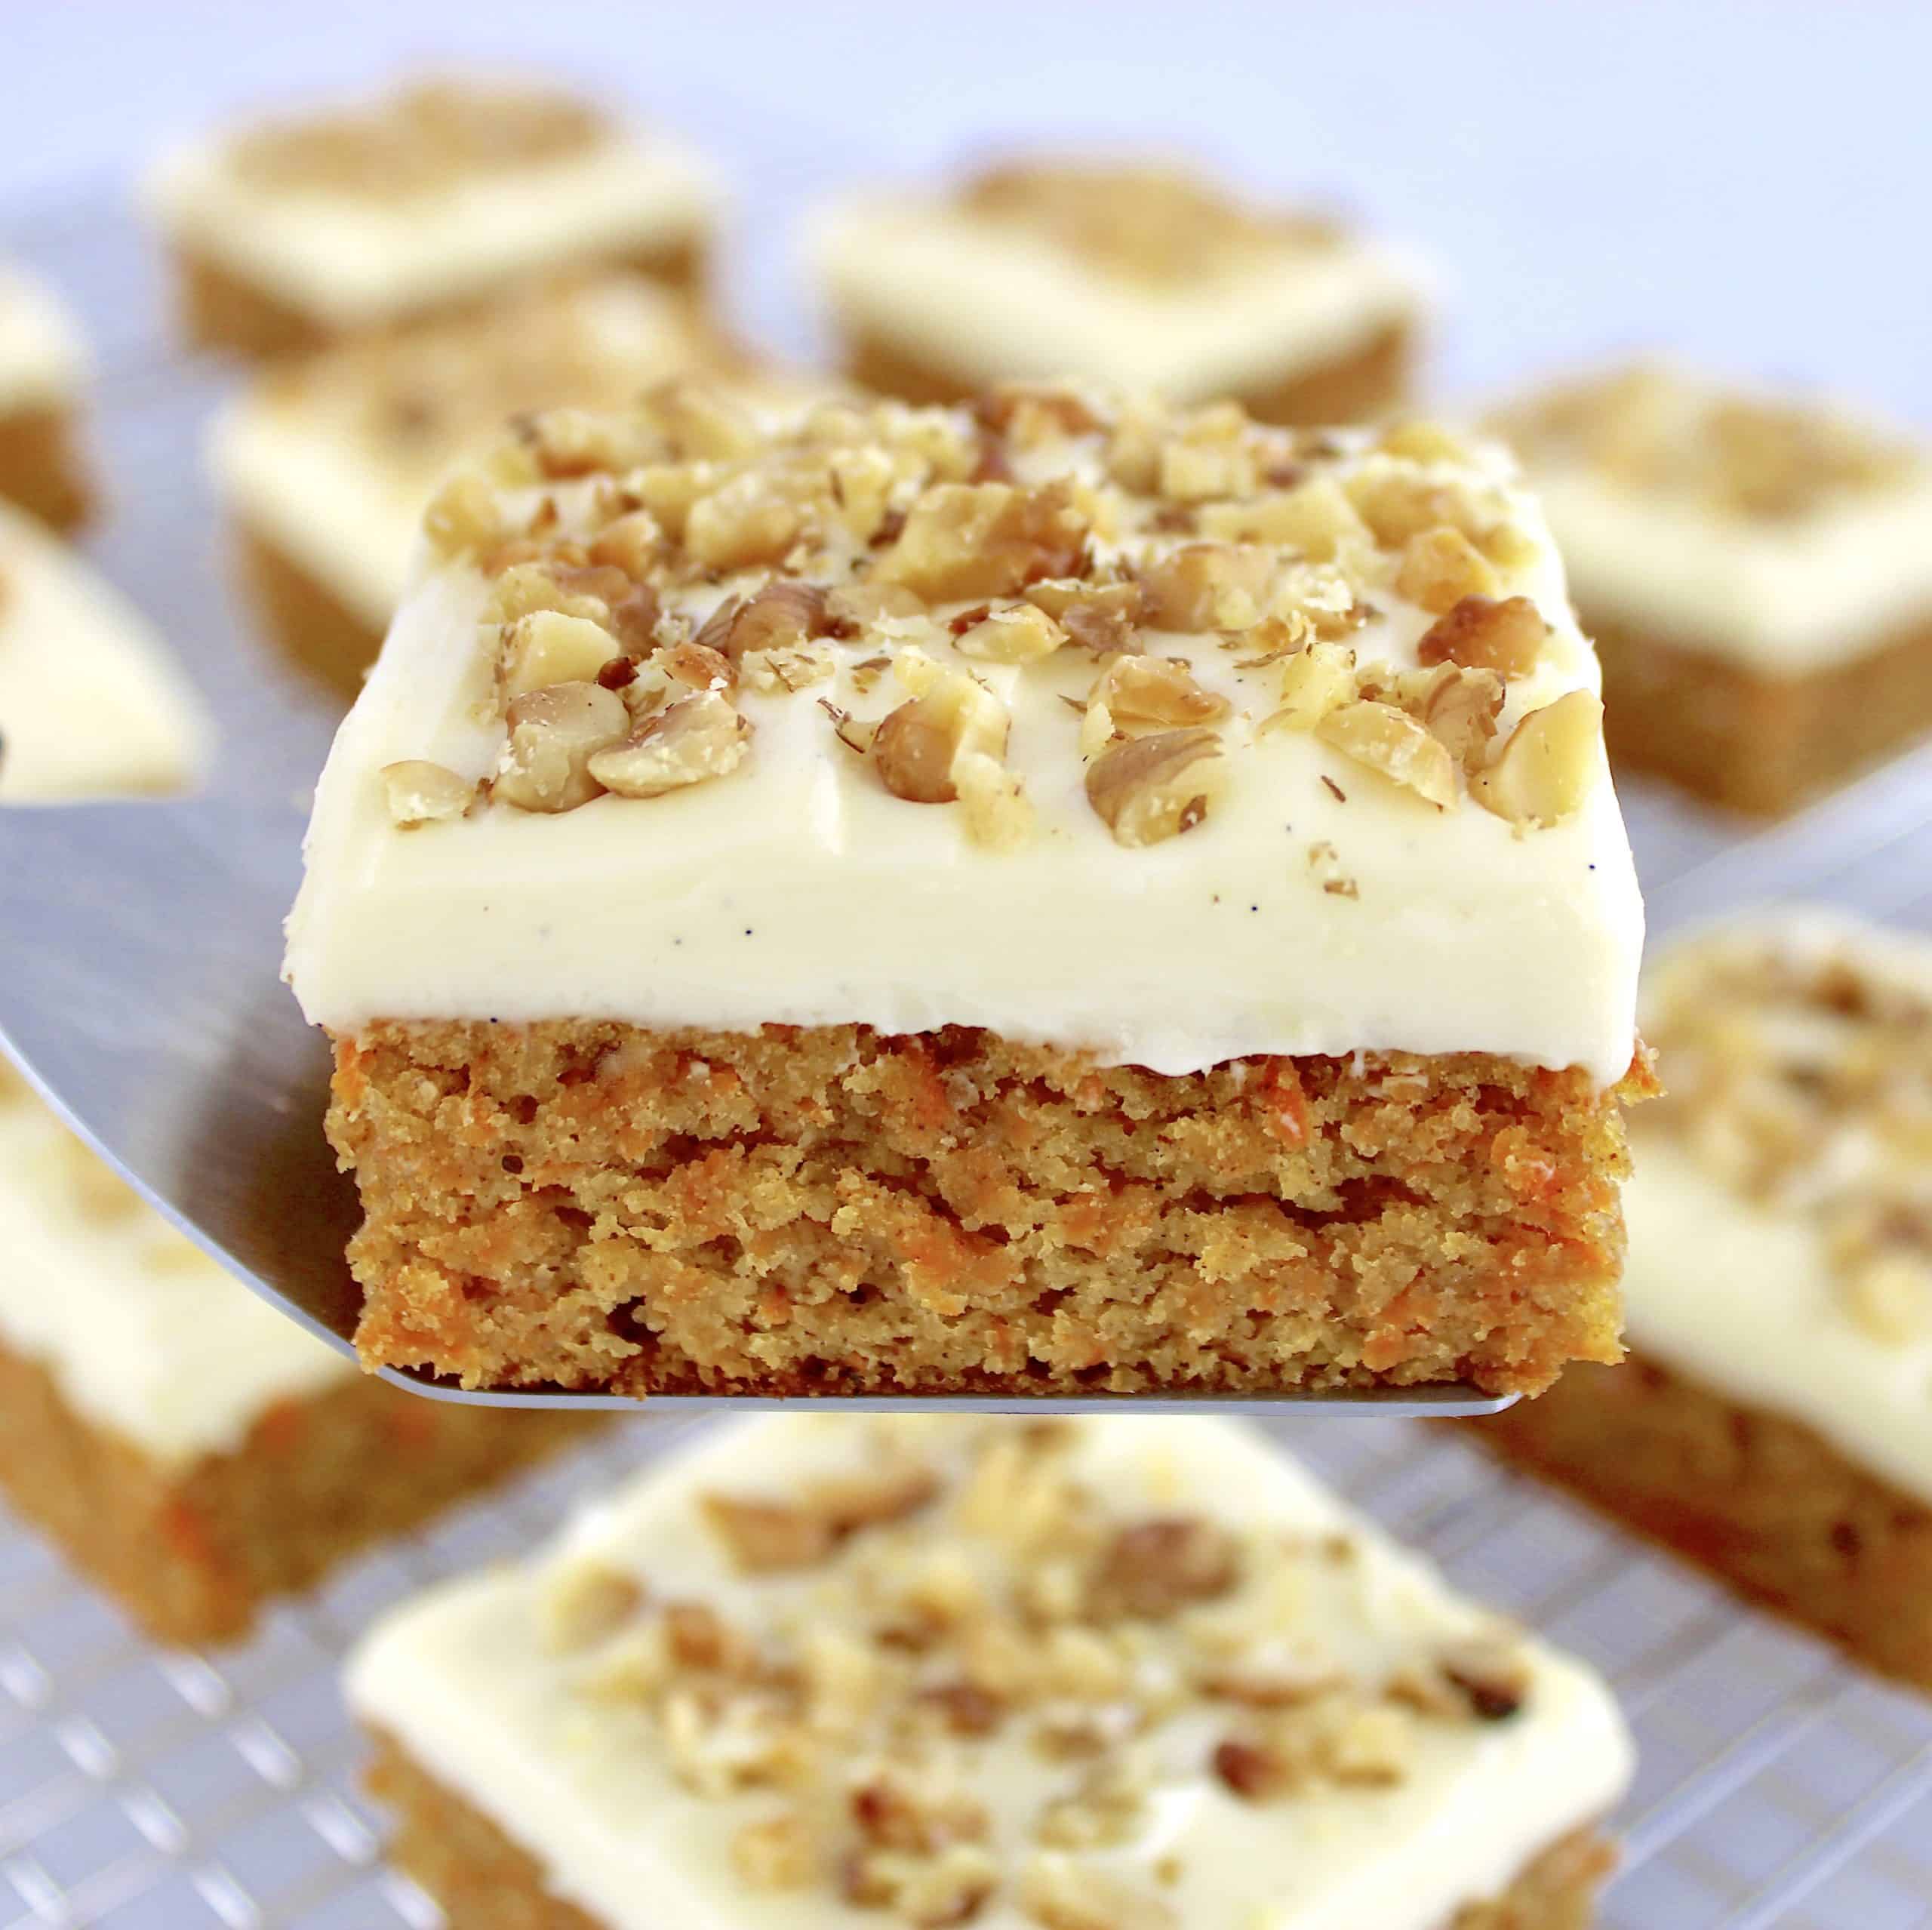 Keto Carrot Cake Bar being held up with spatula with more bars in background